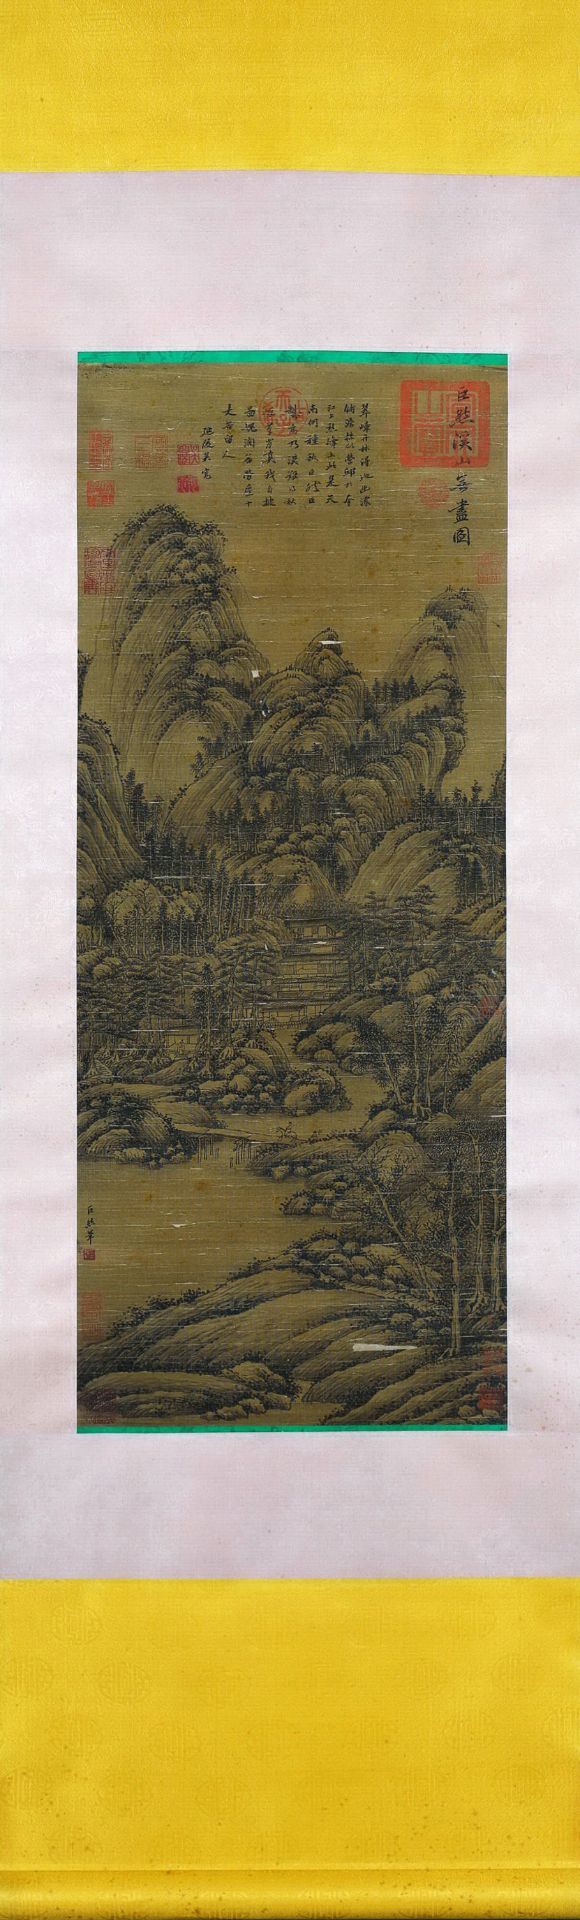 A Chinese Scroll Painting By Ju Ran - Image 9 of 13